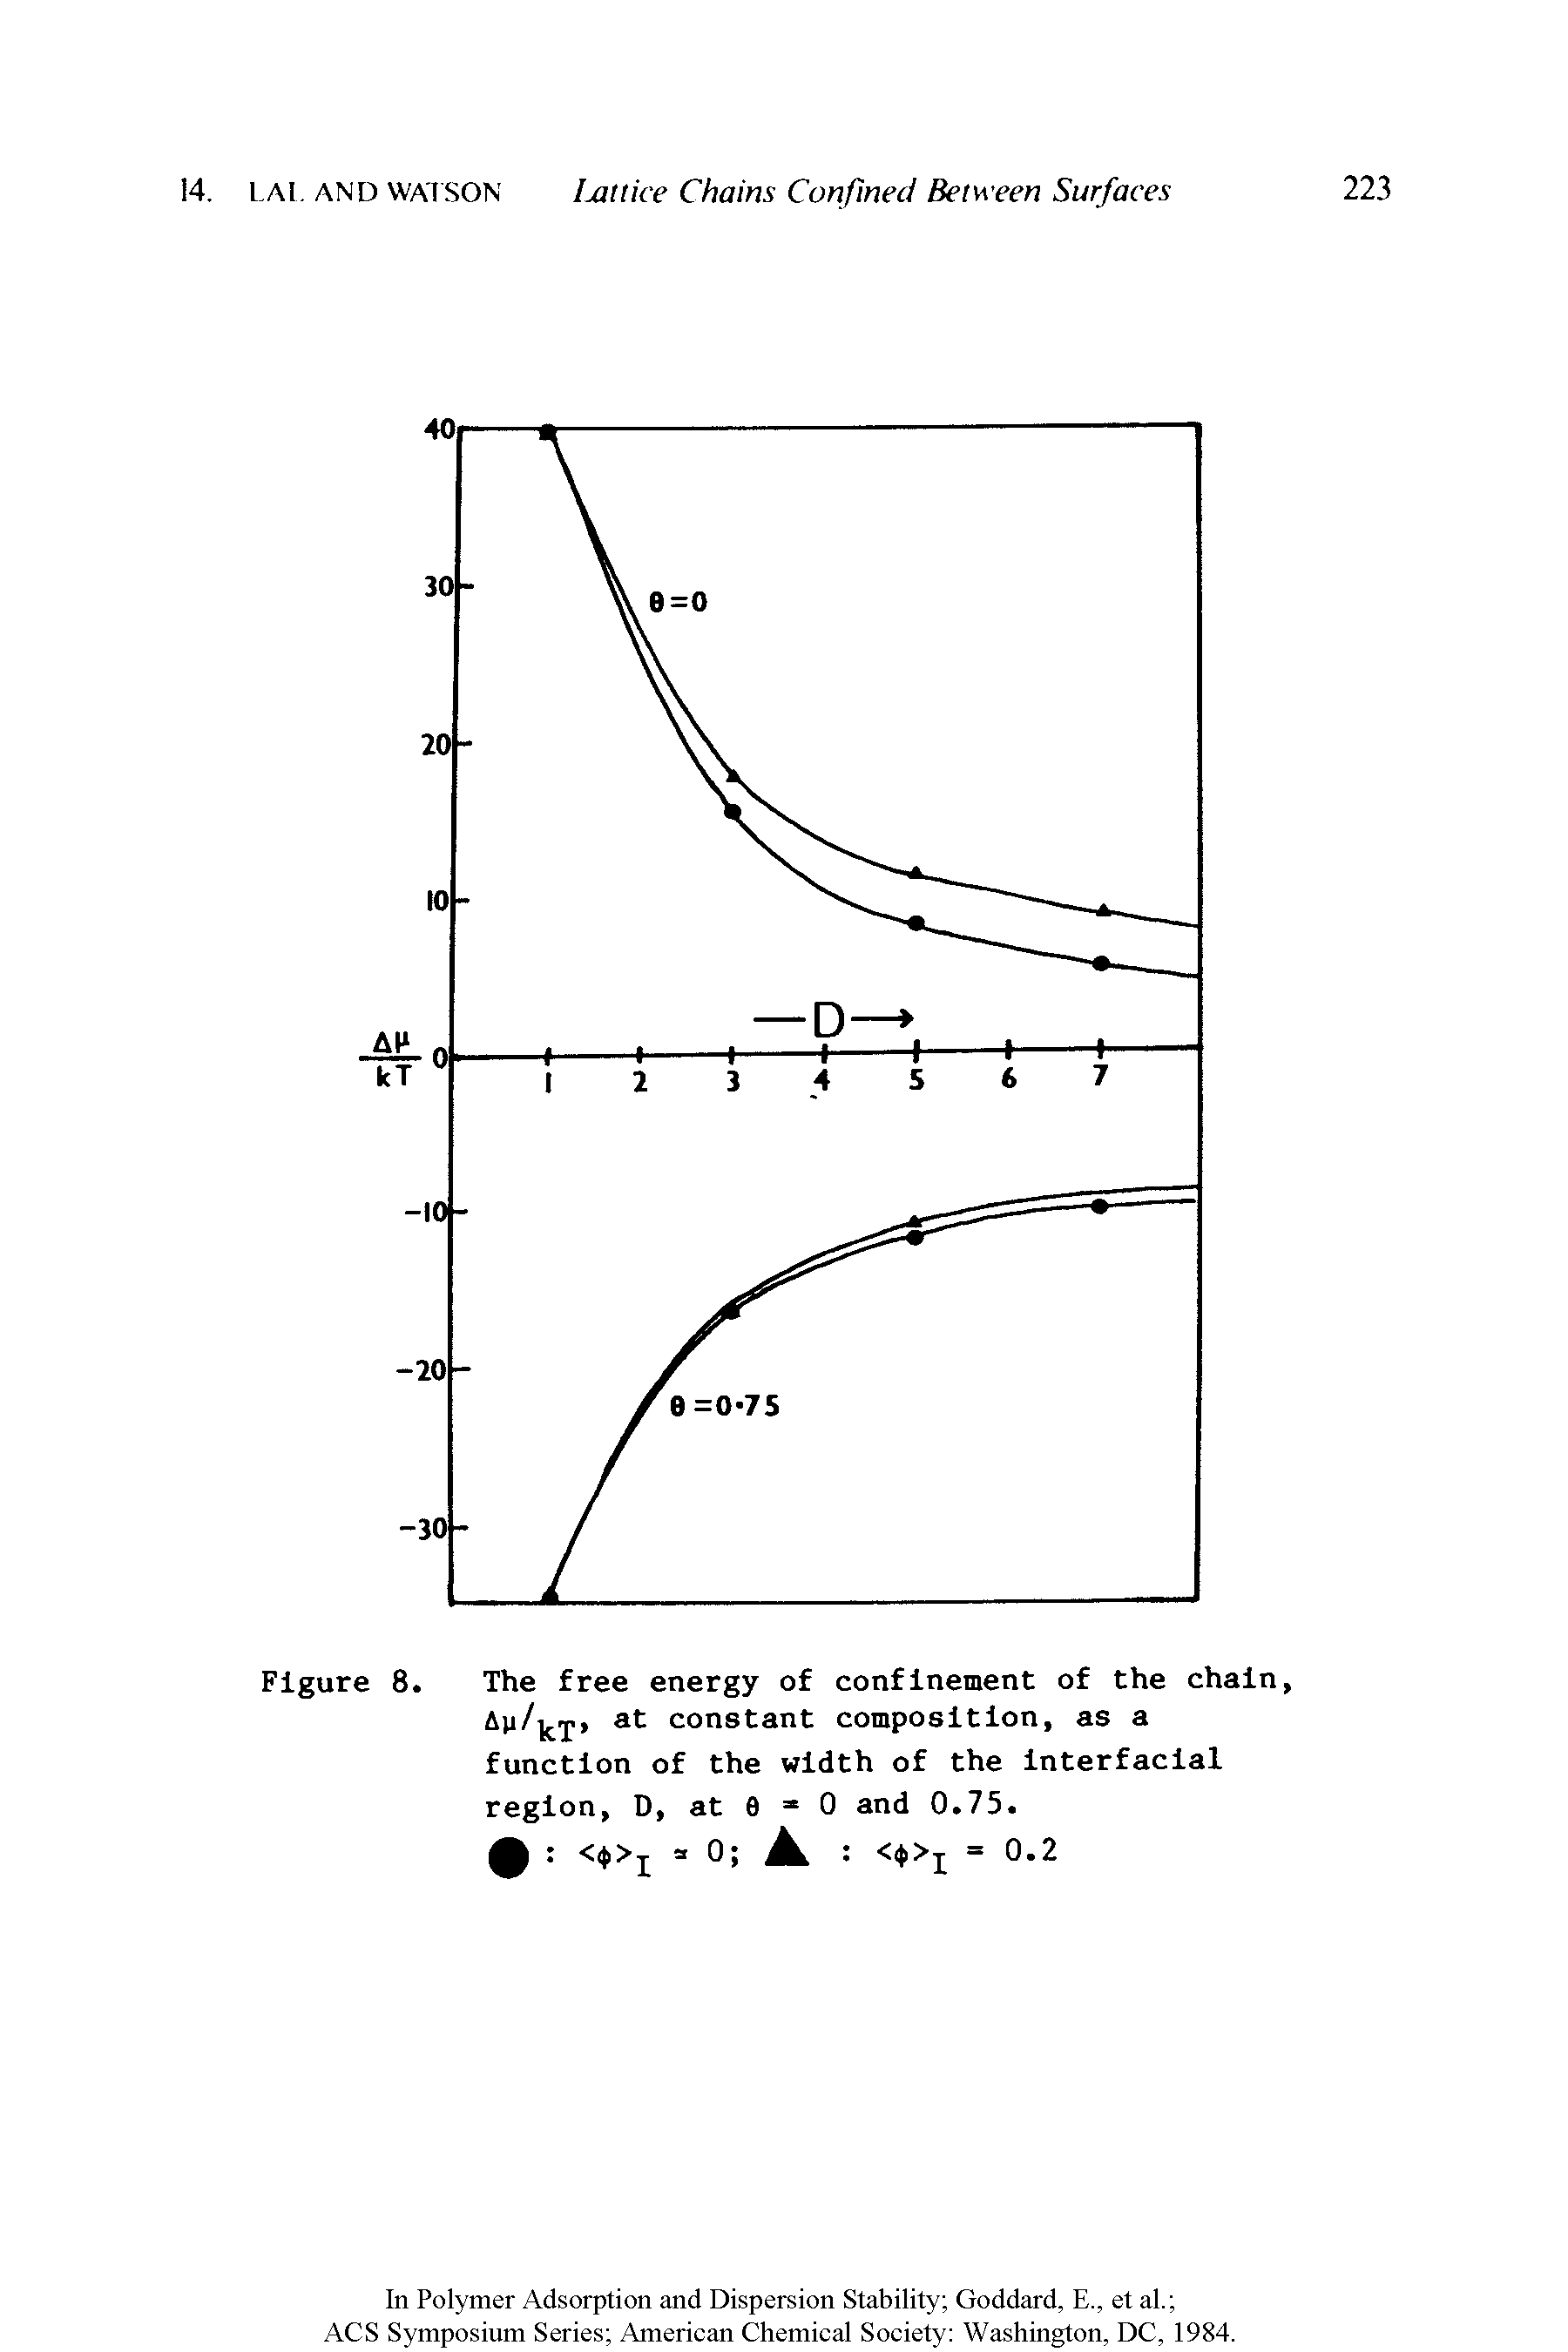 Figure 8. The free energy of confinement of the chain, Ay/ki at constant composition, as a function of the width of the interfacial region, D, at 0 0 and 0.75.